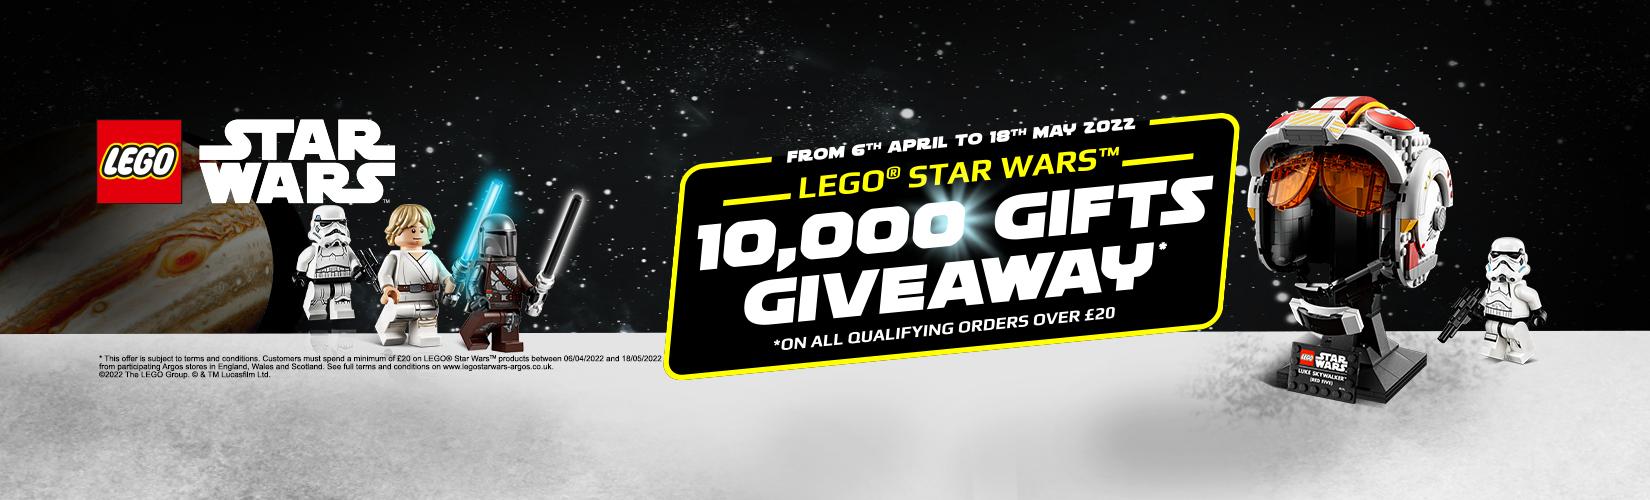 Lego star wars 10000 gifts give away. On all qualify orders over £20.